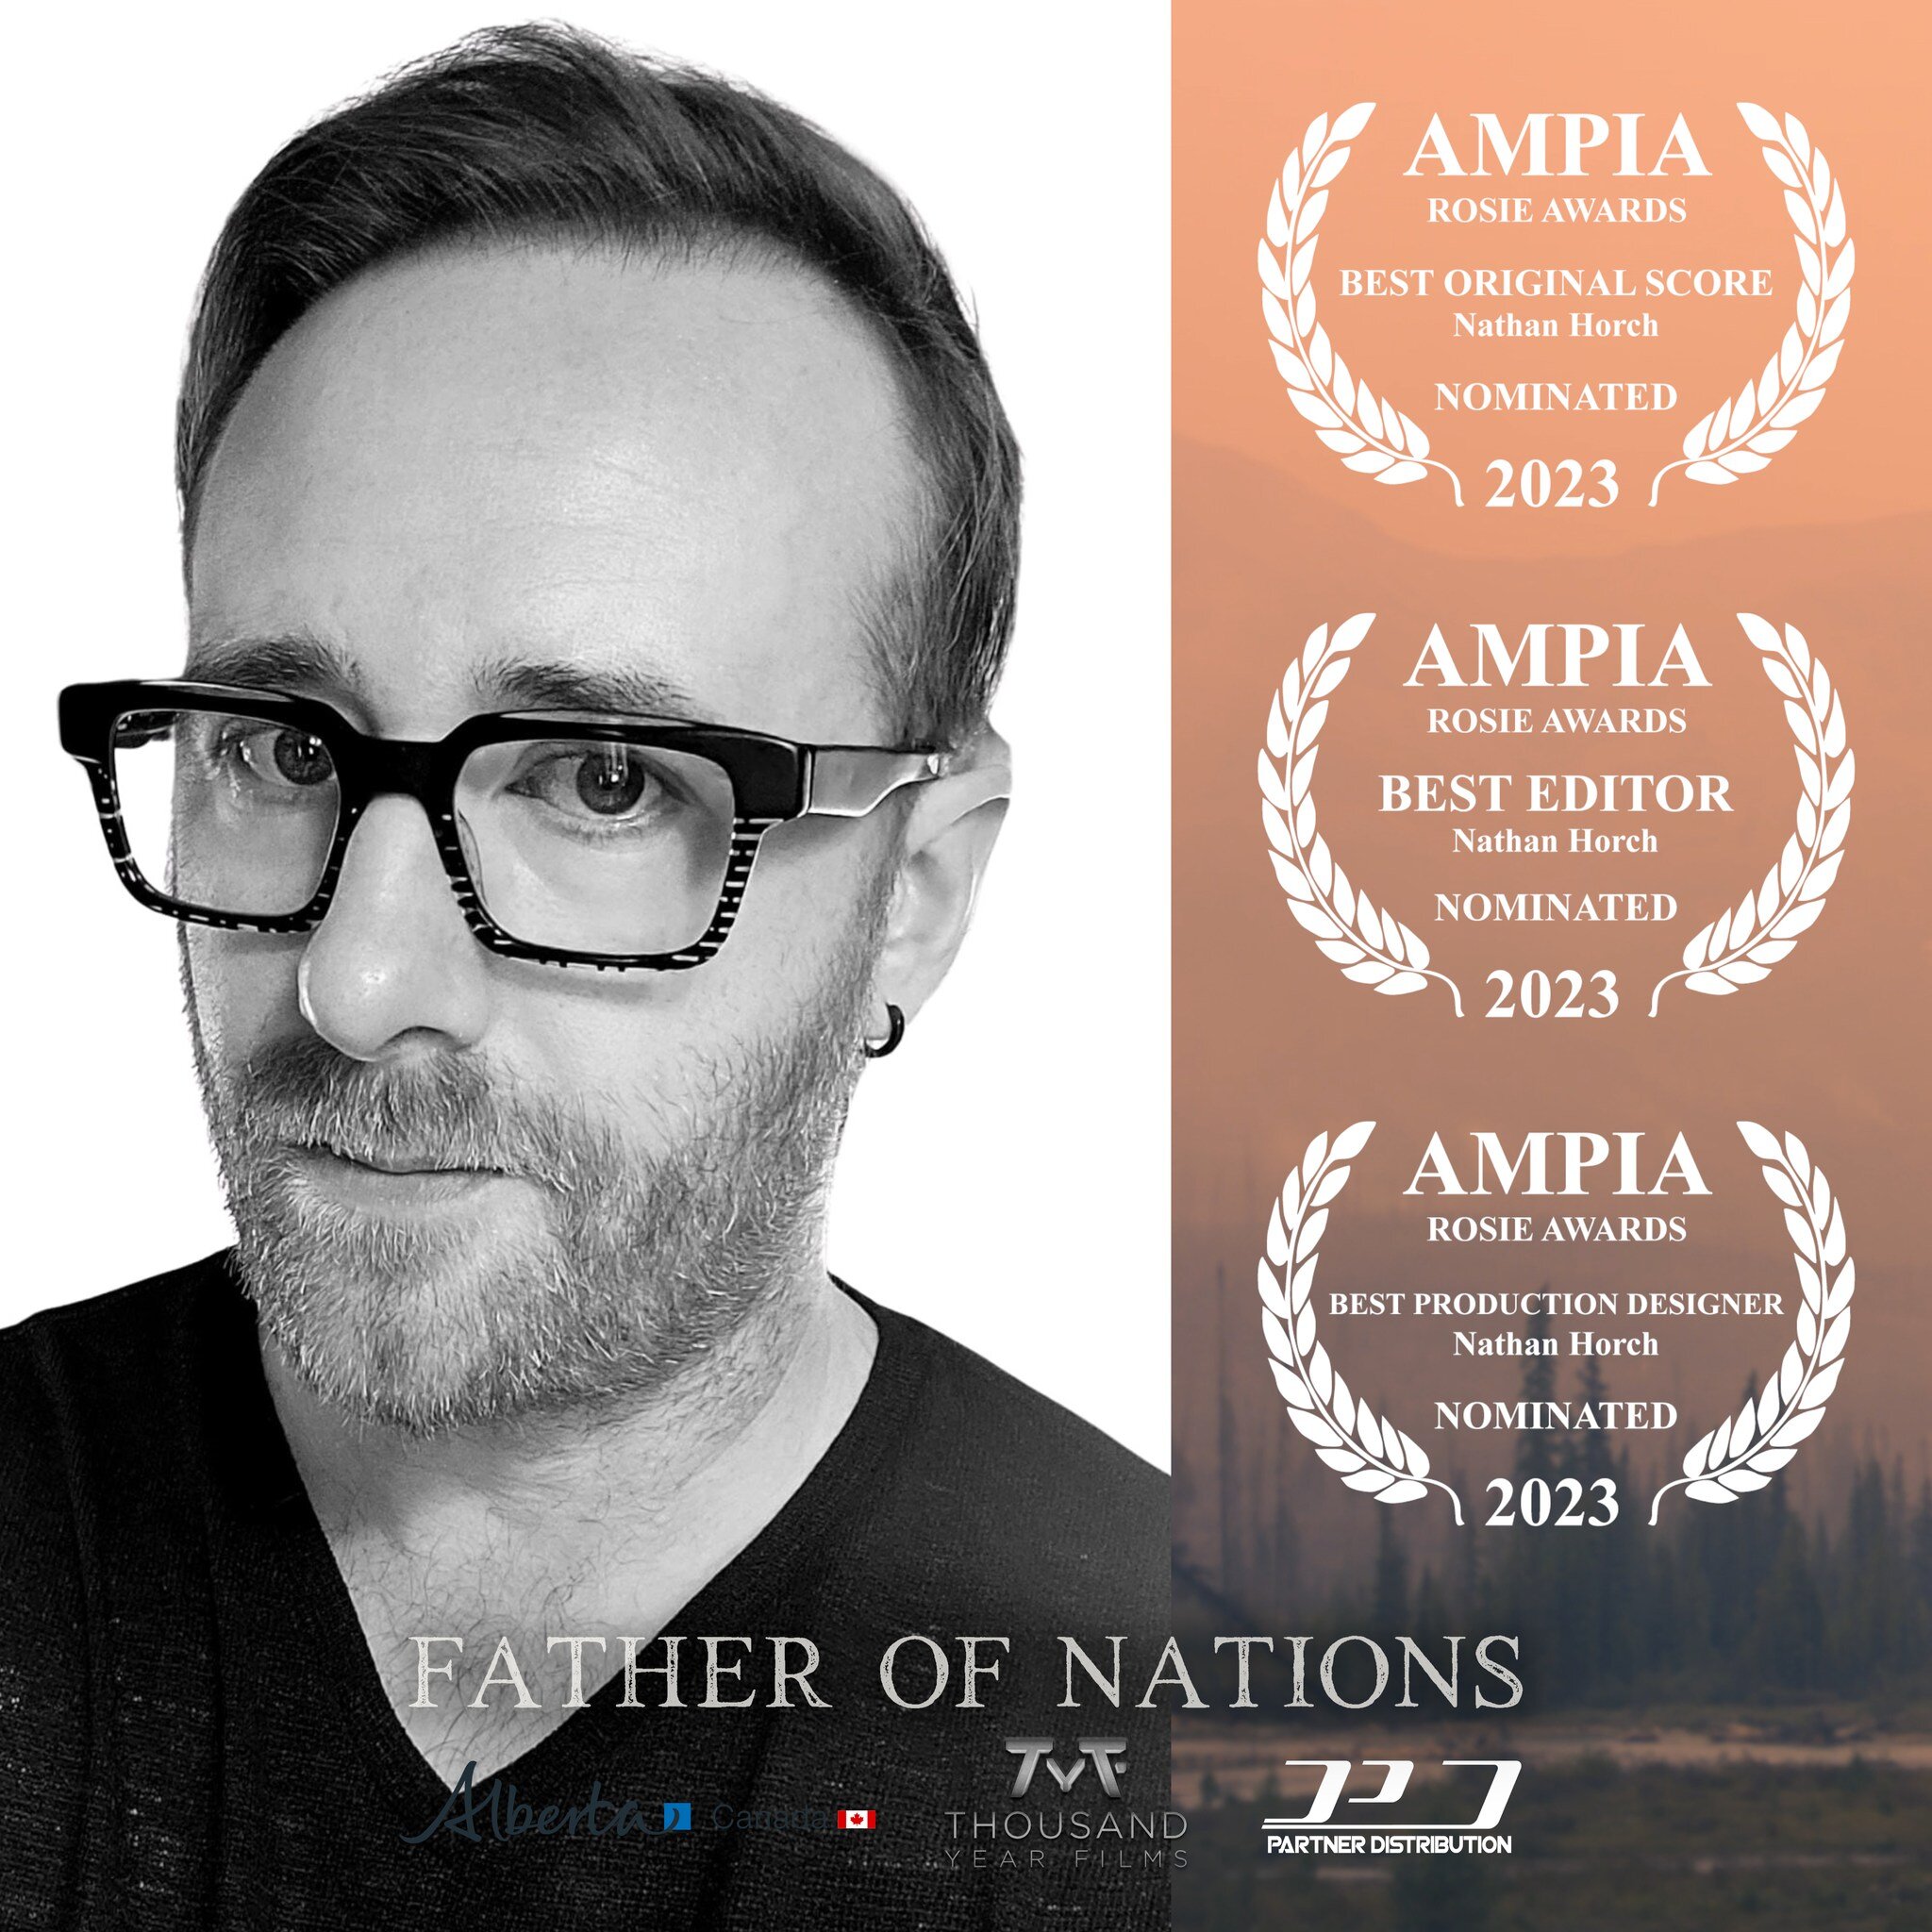 Nominated by @yourampia for 3 awards @nathanhorch is up for Best Original Score, Best Editor, and Best Production Designer. Each of these element contributes greatly to building the world of the @fatherofnationsfilm and telling the story. 

You can g